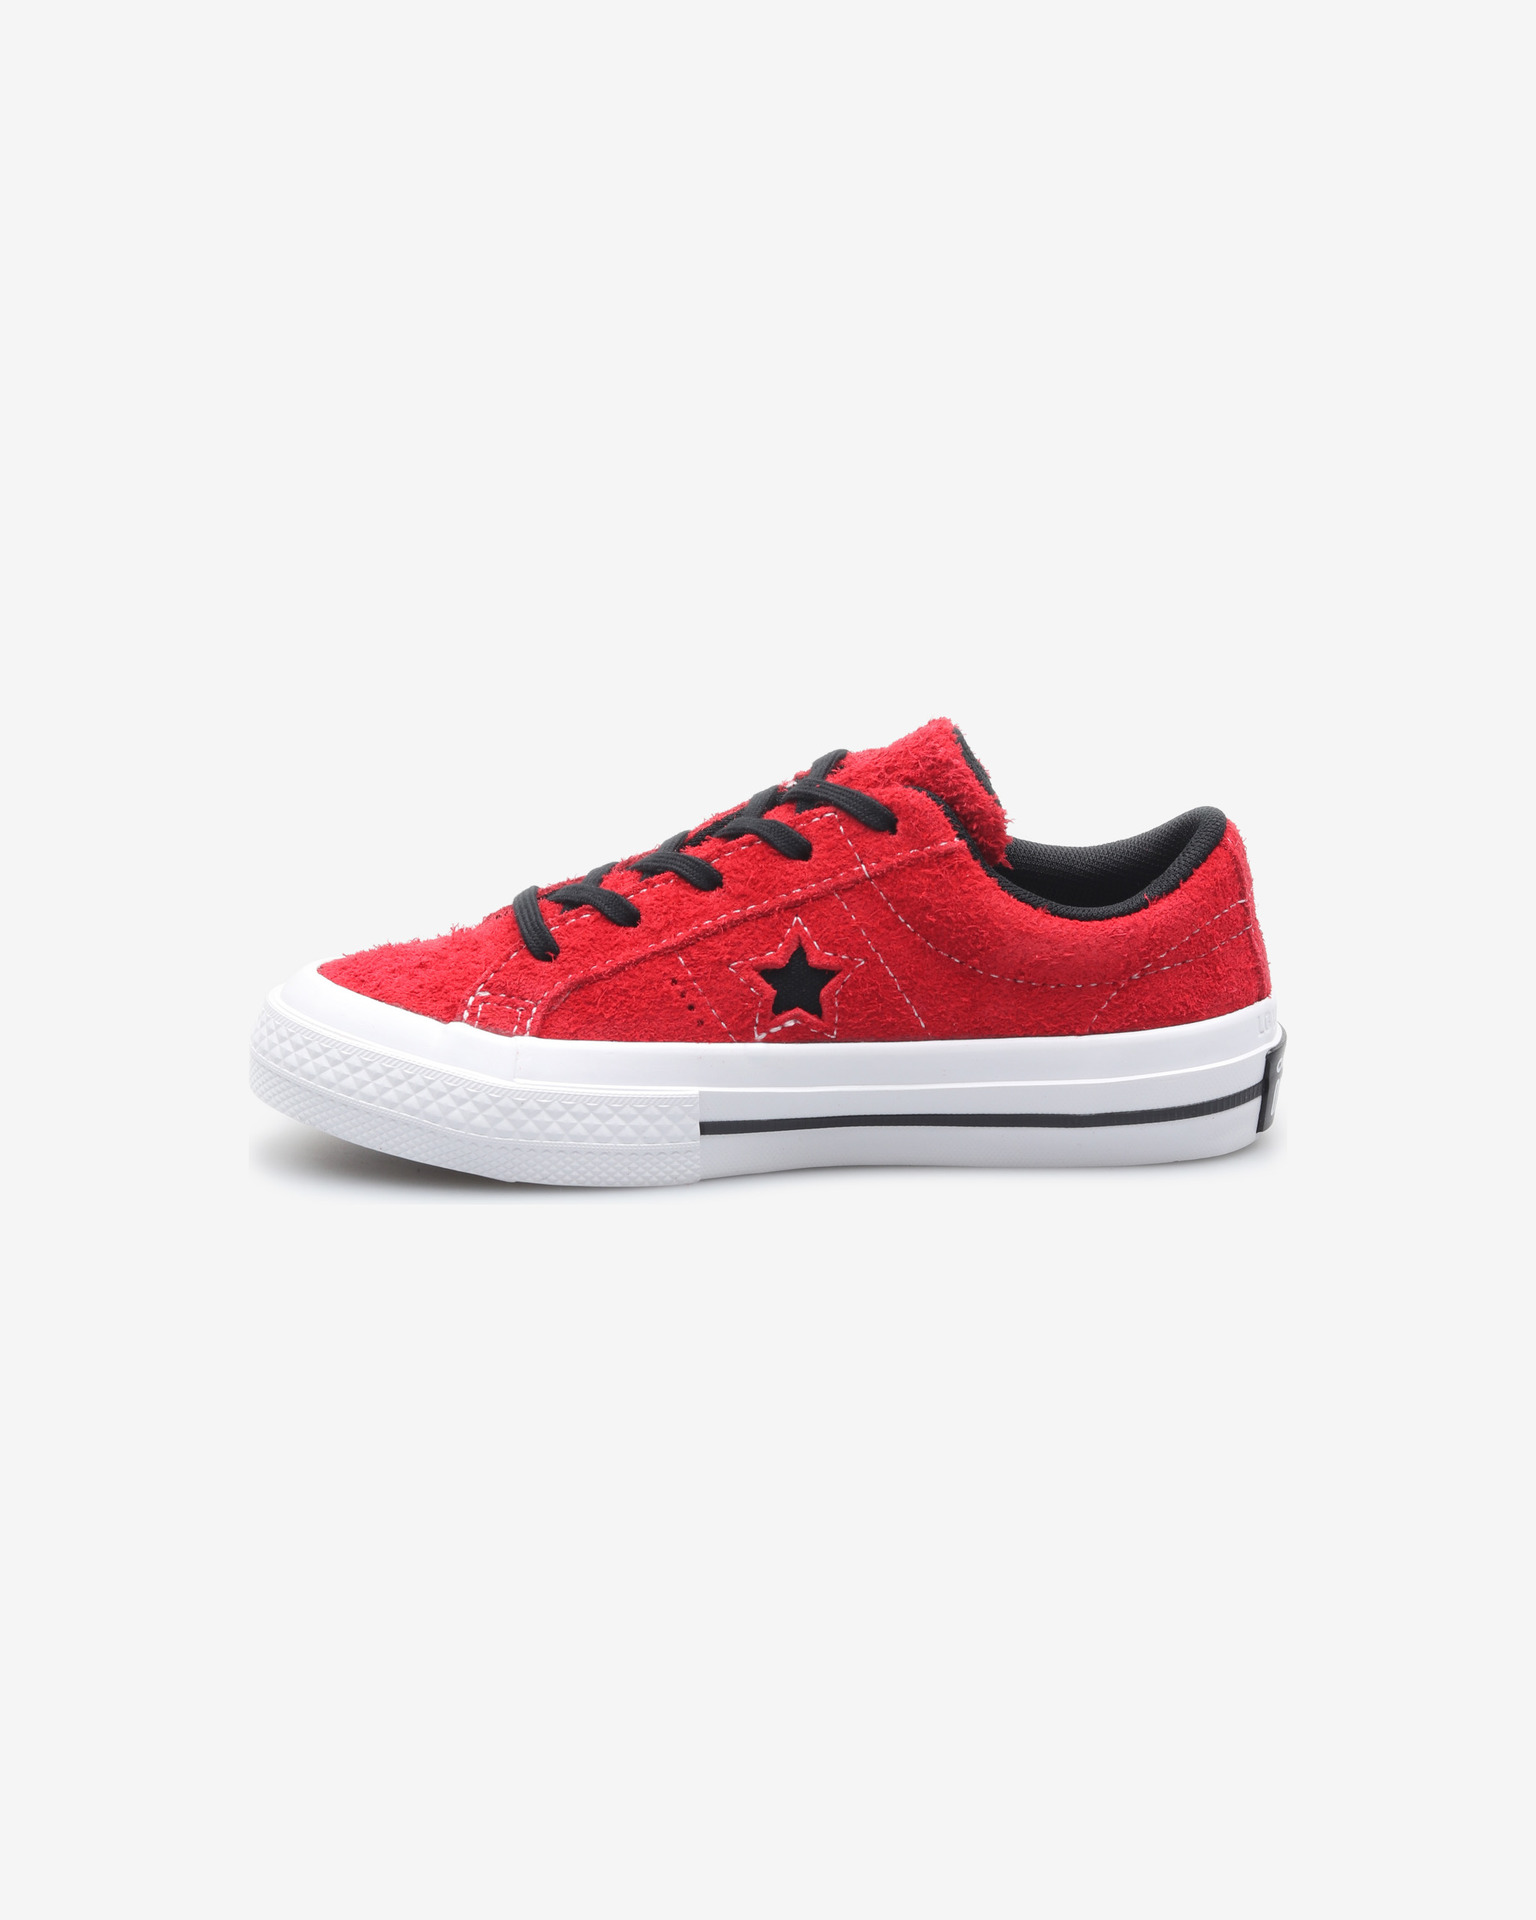 converse one star shoes kids